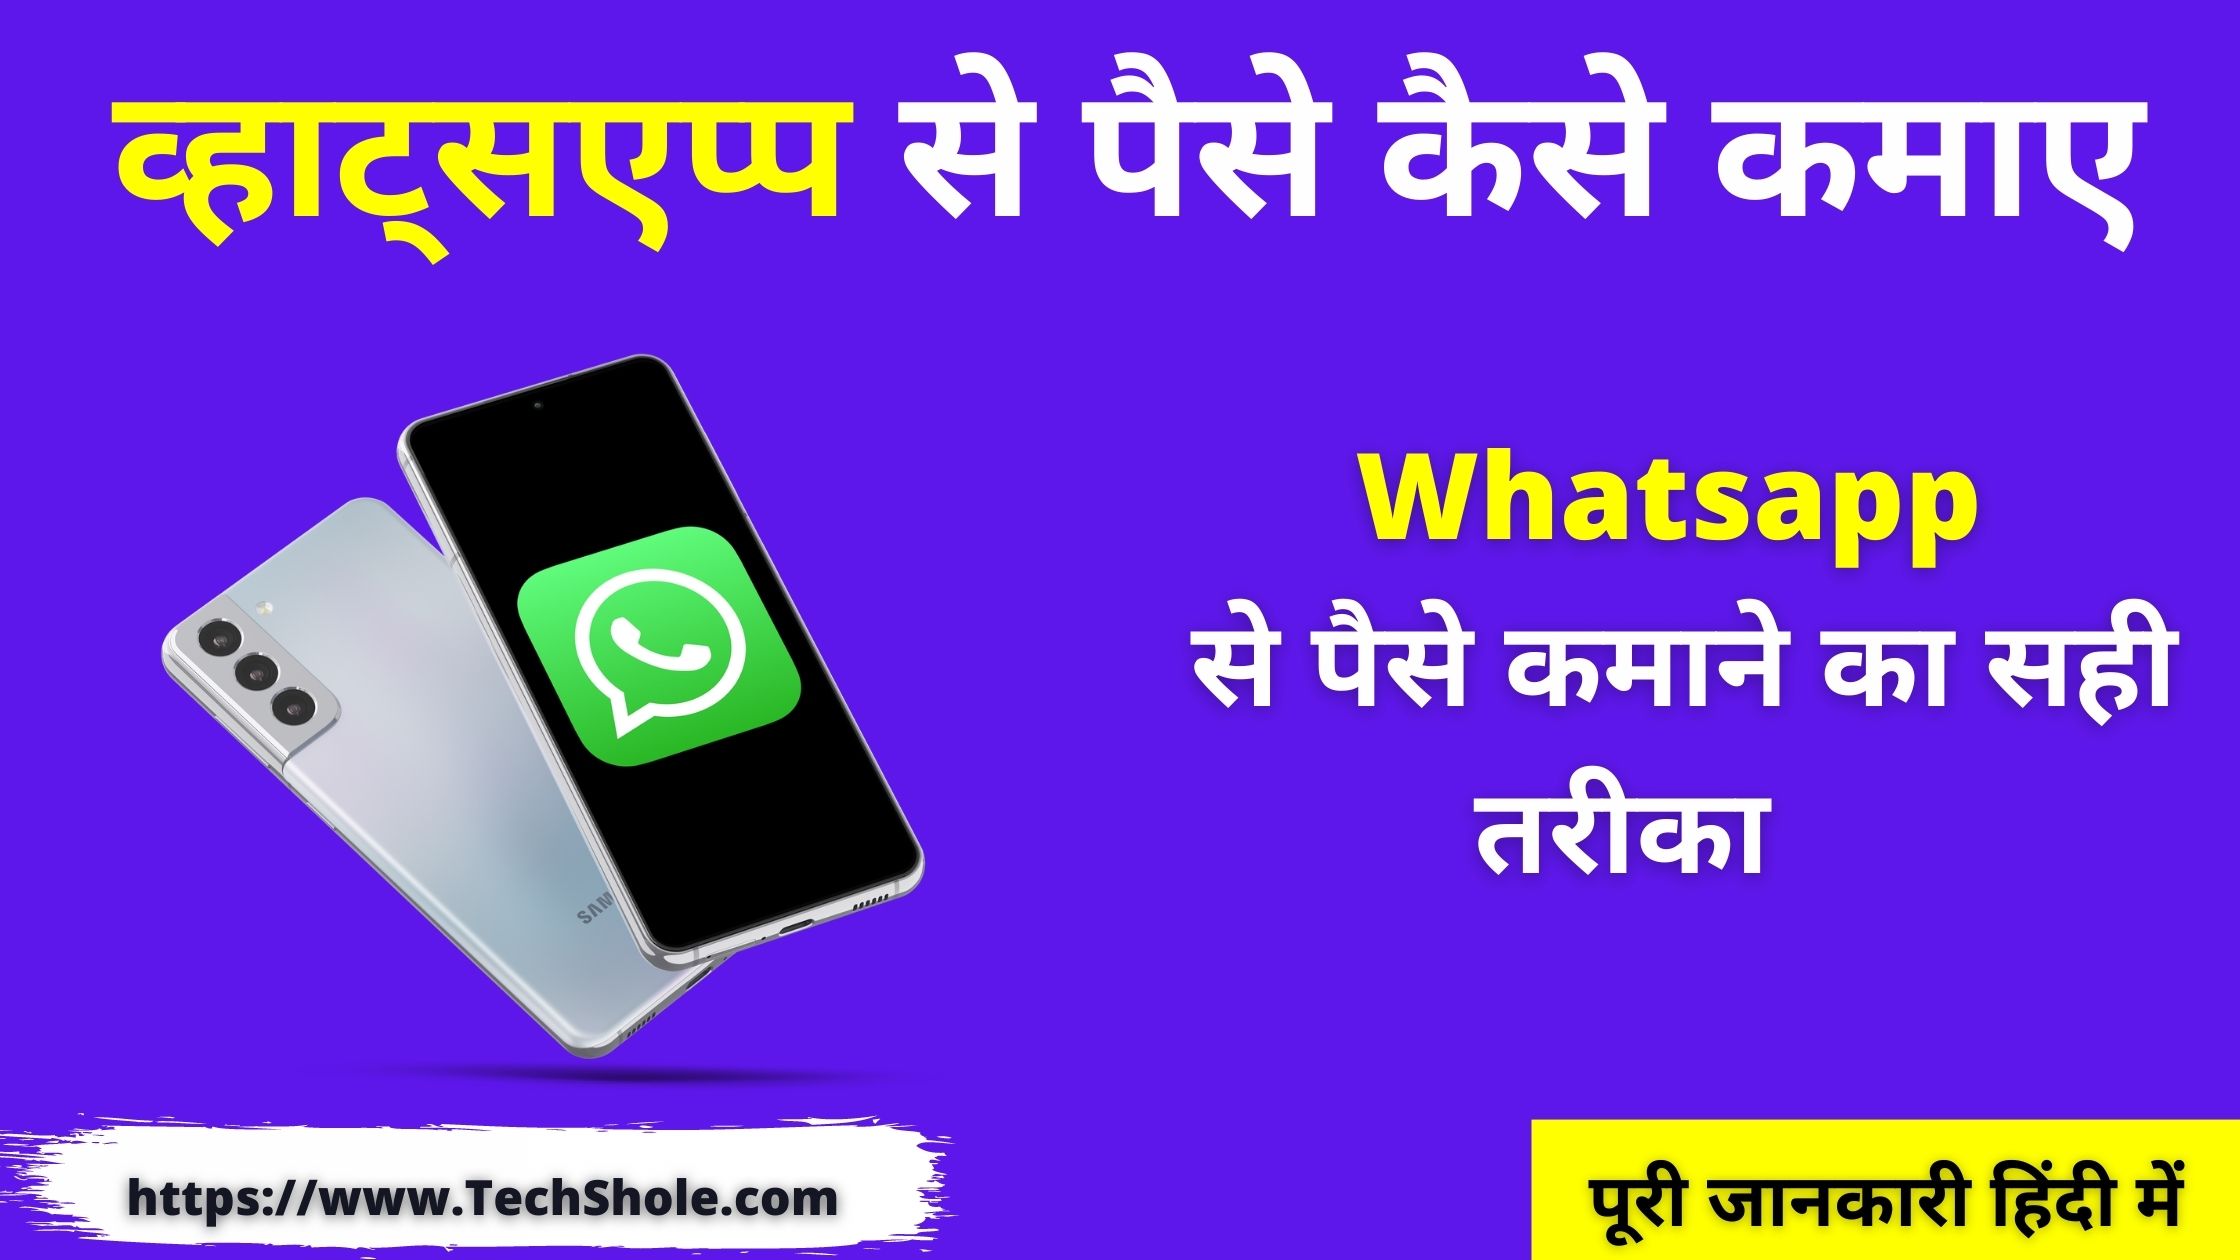 How to earn money from Whatsapp online sitting at home - How to earn money from Whatsapp In Hindi